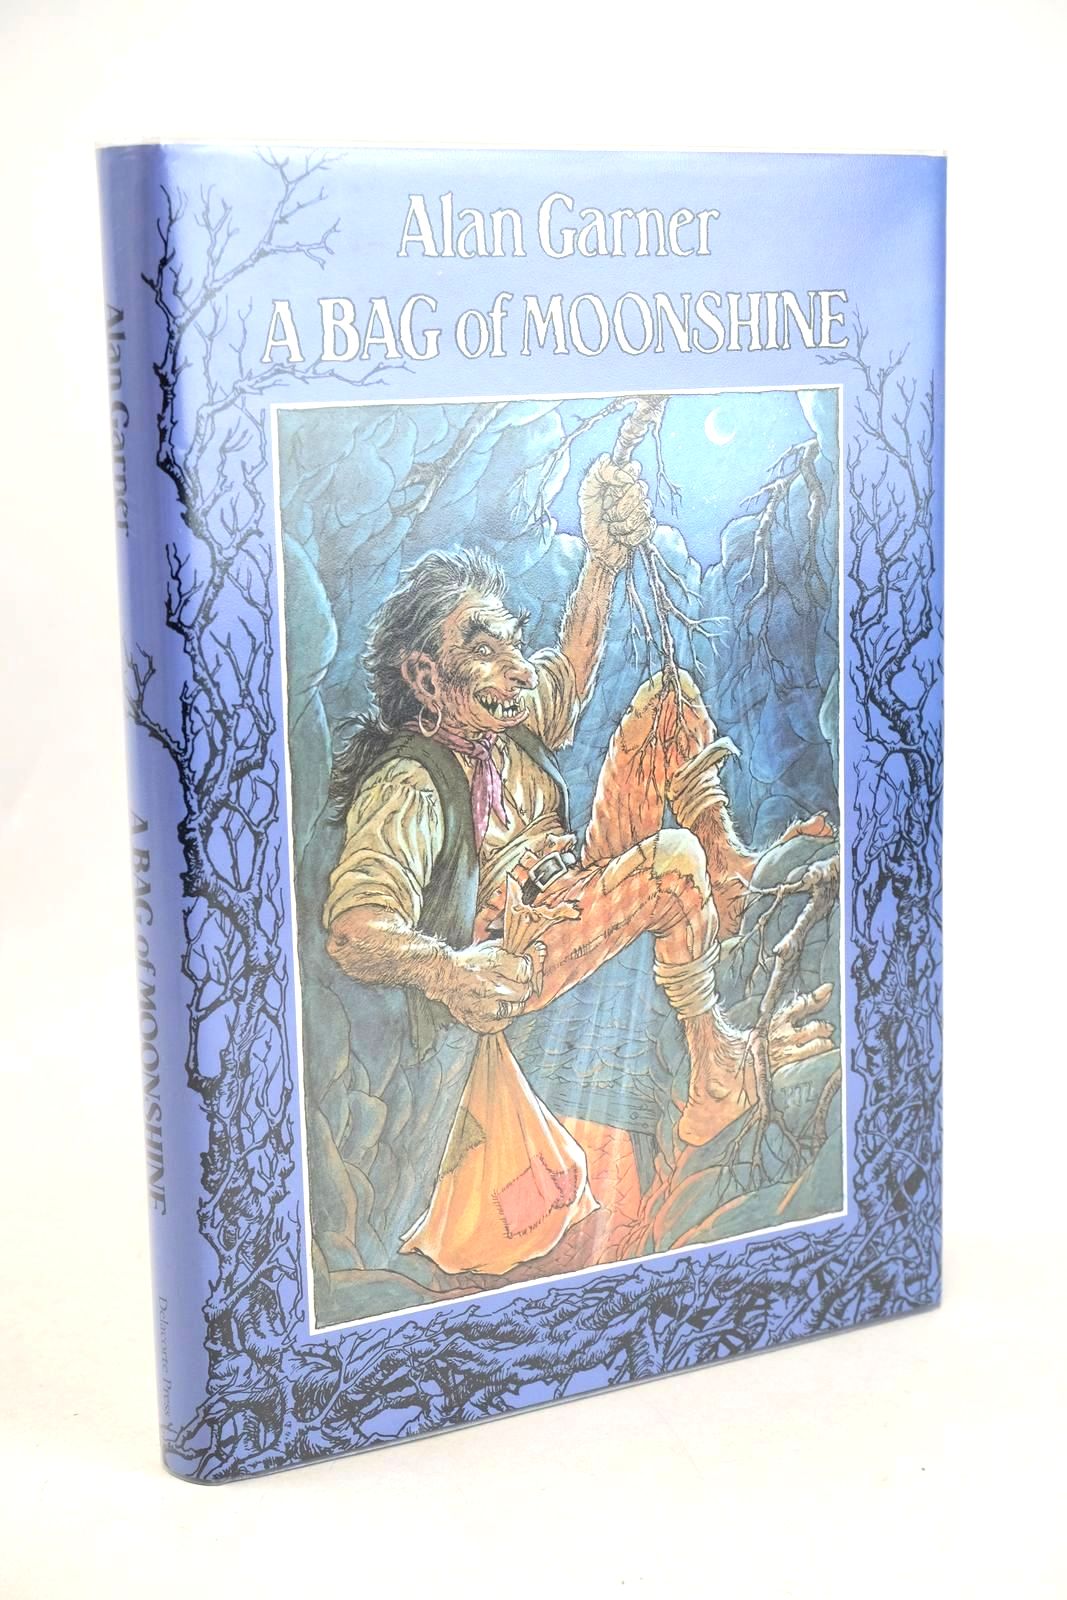 Photo of A BAG OF MOONSHINE written by Garner, Alan illustrated by Lynch, P.J. published by Delacorte Press (STOCK CODE: 1327999)  for sale by Stella & Rose's Books